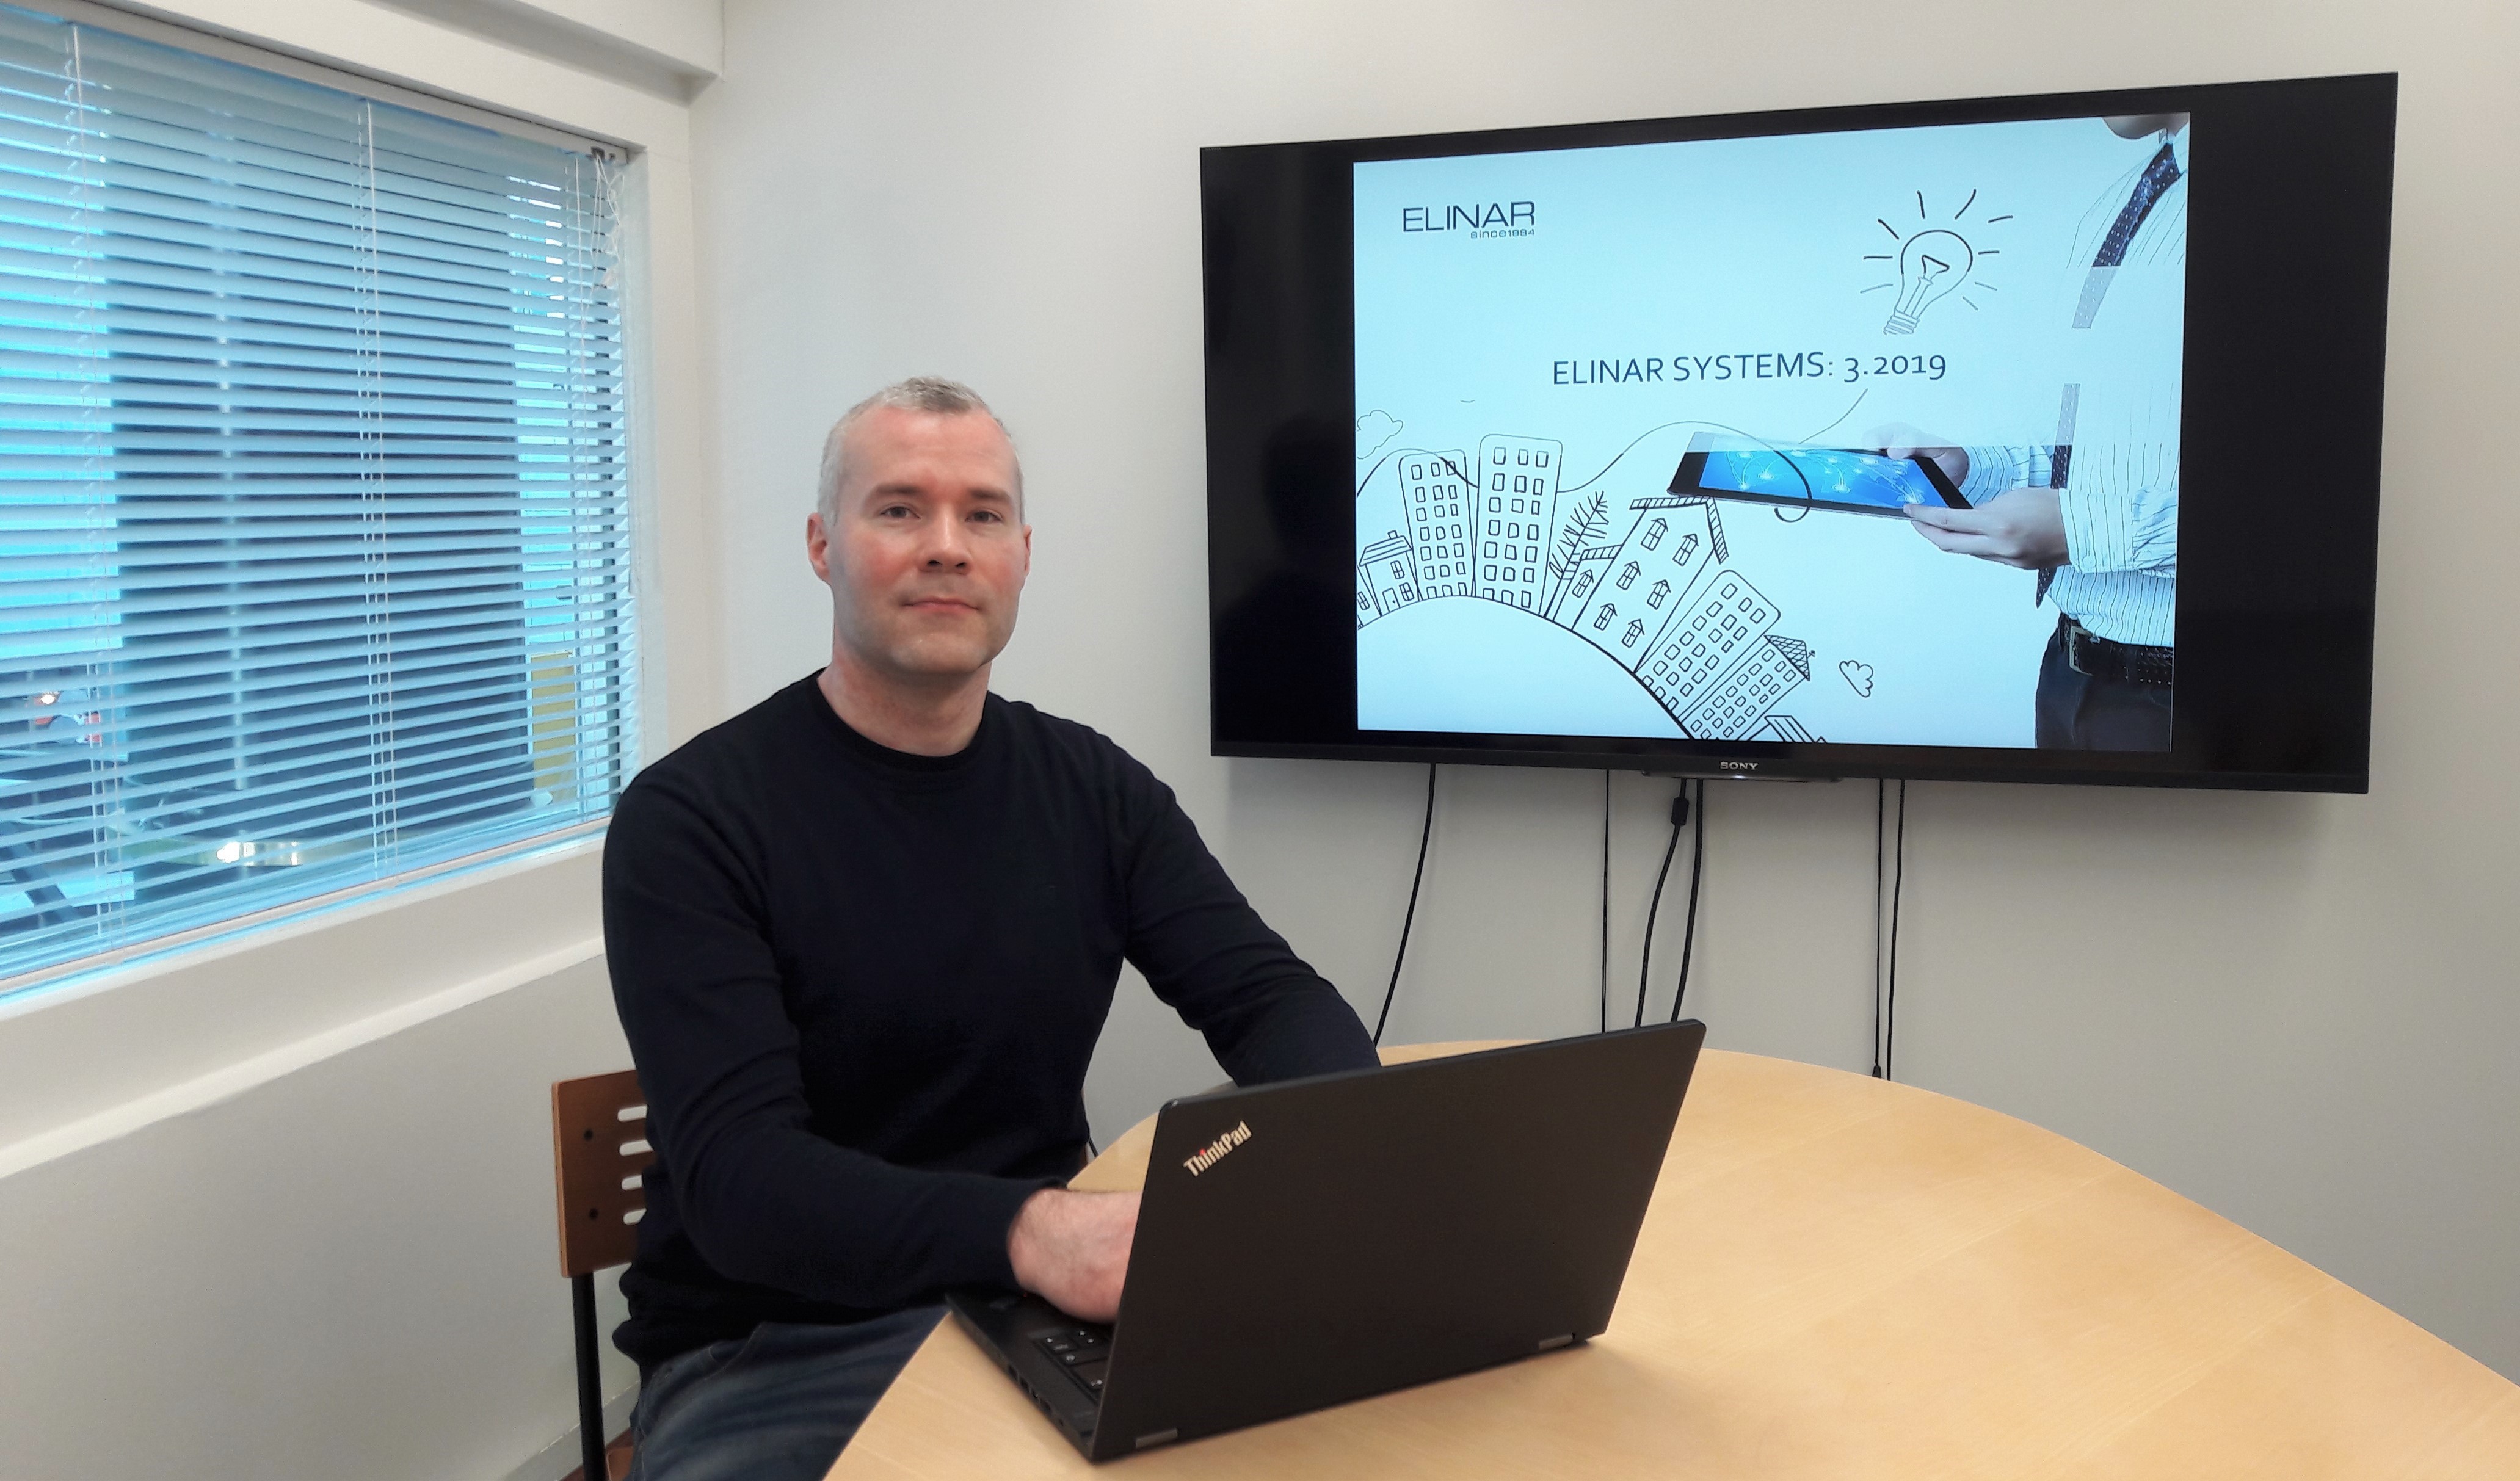 Elinar's Systems Team Leader Ilkka Olli likes moving to counterbalance statistic work